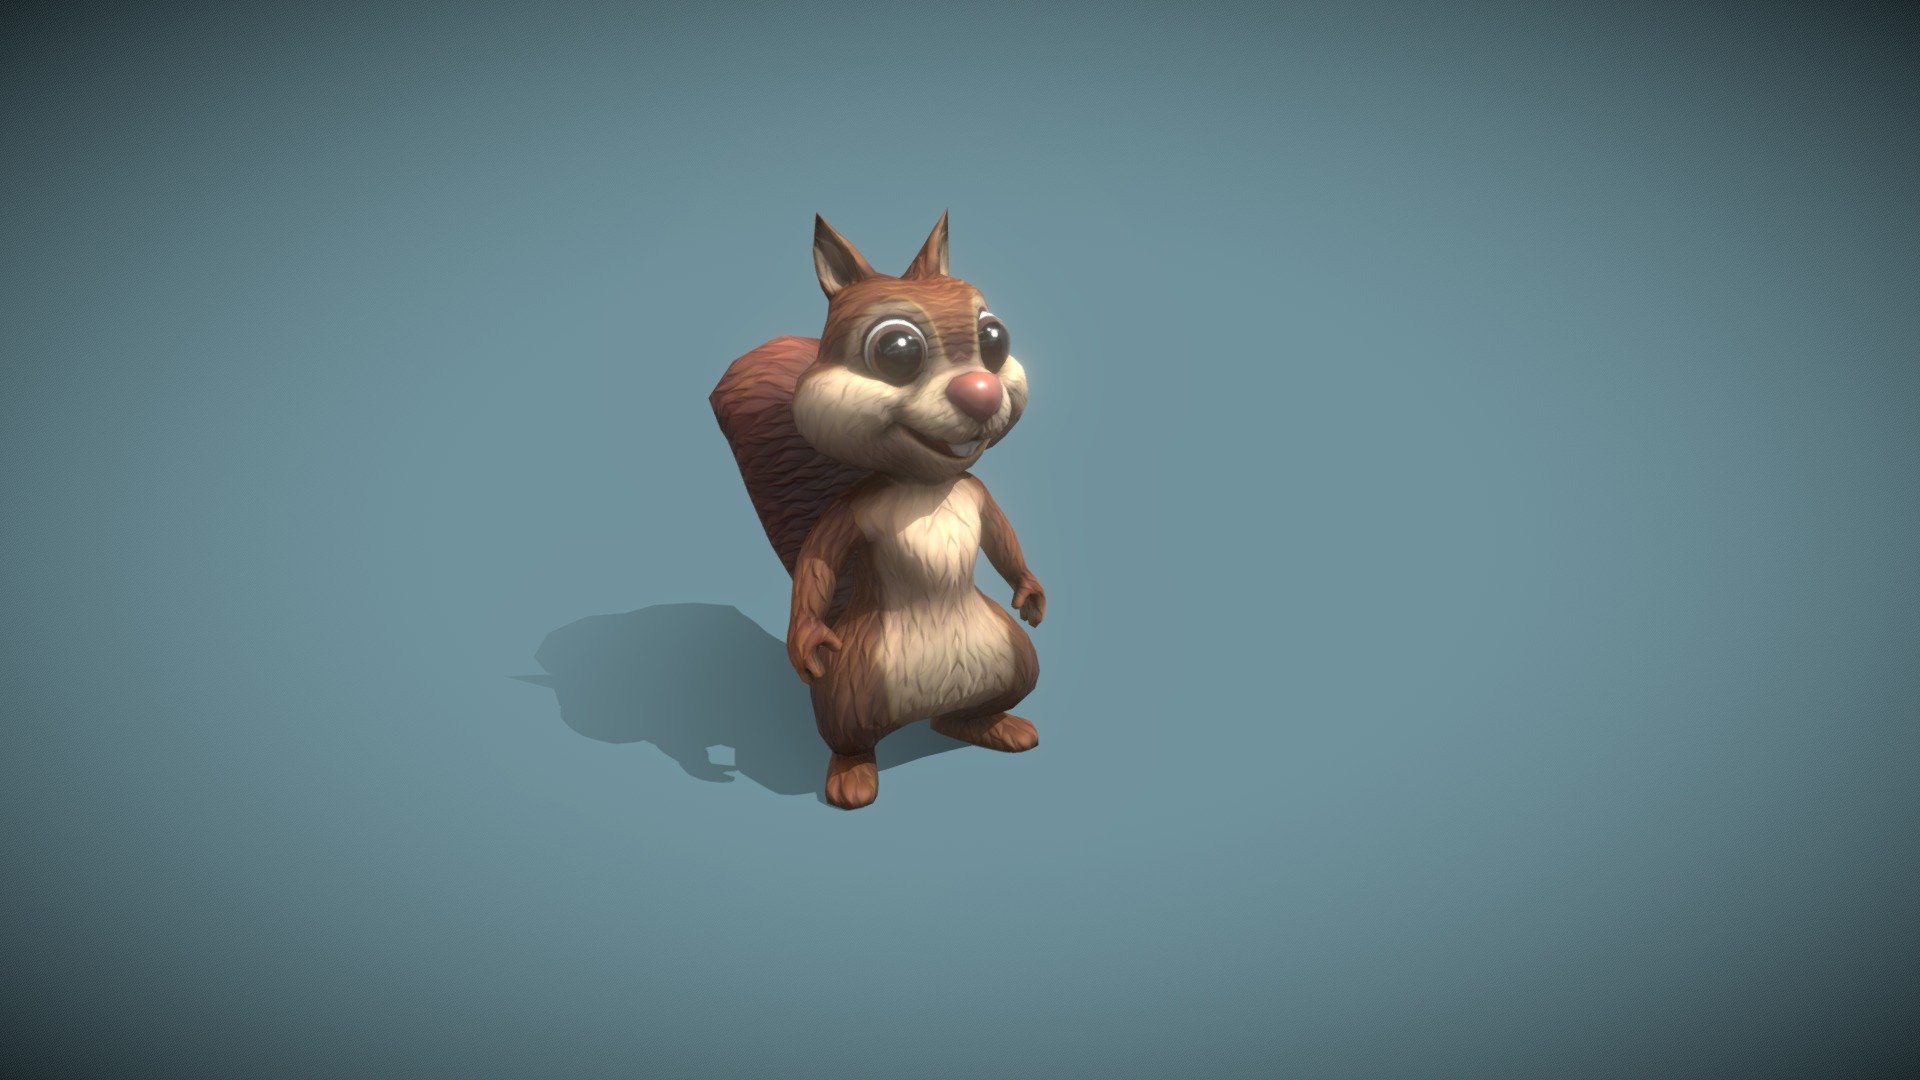 Cartoon Squirrel Animated 3D Model is completely ready to be used in your games, animations, films, designs etc.  

All textures and materials are included and mapped in every format. The model is completely ready for visualization in any 3d software and engine.  

Technical details:




File formats included in the package are: FBX, GLB, ABC, DAE, PLY, STL, BLEND, gLTF (generated), USDZ (generated)

Native software file format: BLEND

Render engine: Eevee

Polygons: 2,164

Overall vertex count: 1,761

Textures: Color, Metallic, Roughness, Normal, AO

All textures are 2k resolution.

The model is rigged and animated.

8 animations are included: idle, idle (eating), idle (holding), look around, run (on all 4), talk, walk, climb. 

All animations (besides climb) are full cycles.

You can see all animations on YouTube https://www.youtube.com/watch?v=vP9RbTDg4og

Only following formats contain rig and animation: BLEND, FBX, GLTF/GLB
 - Cartoon Squirrel Animated 3D Model - Buy Royalty Free 3D model by 3DDisco 3d model